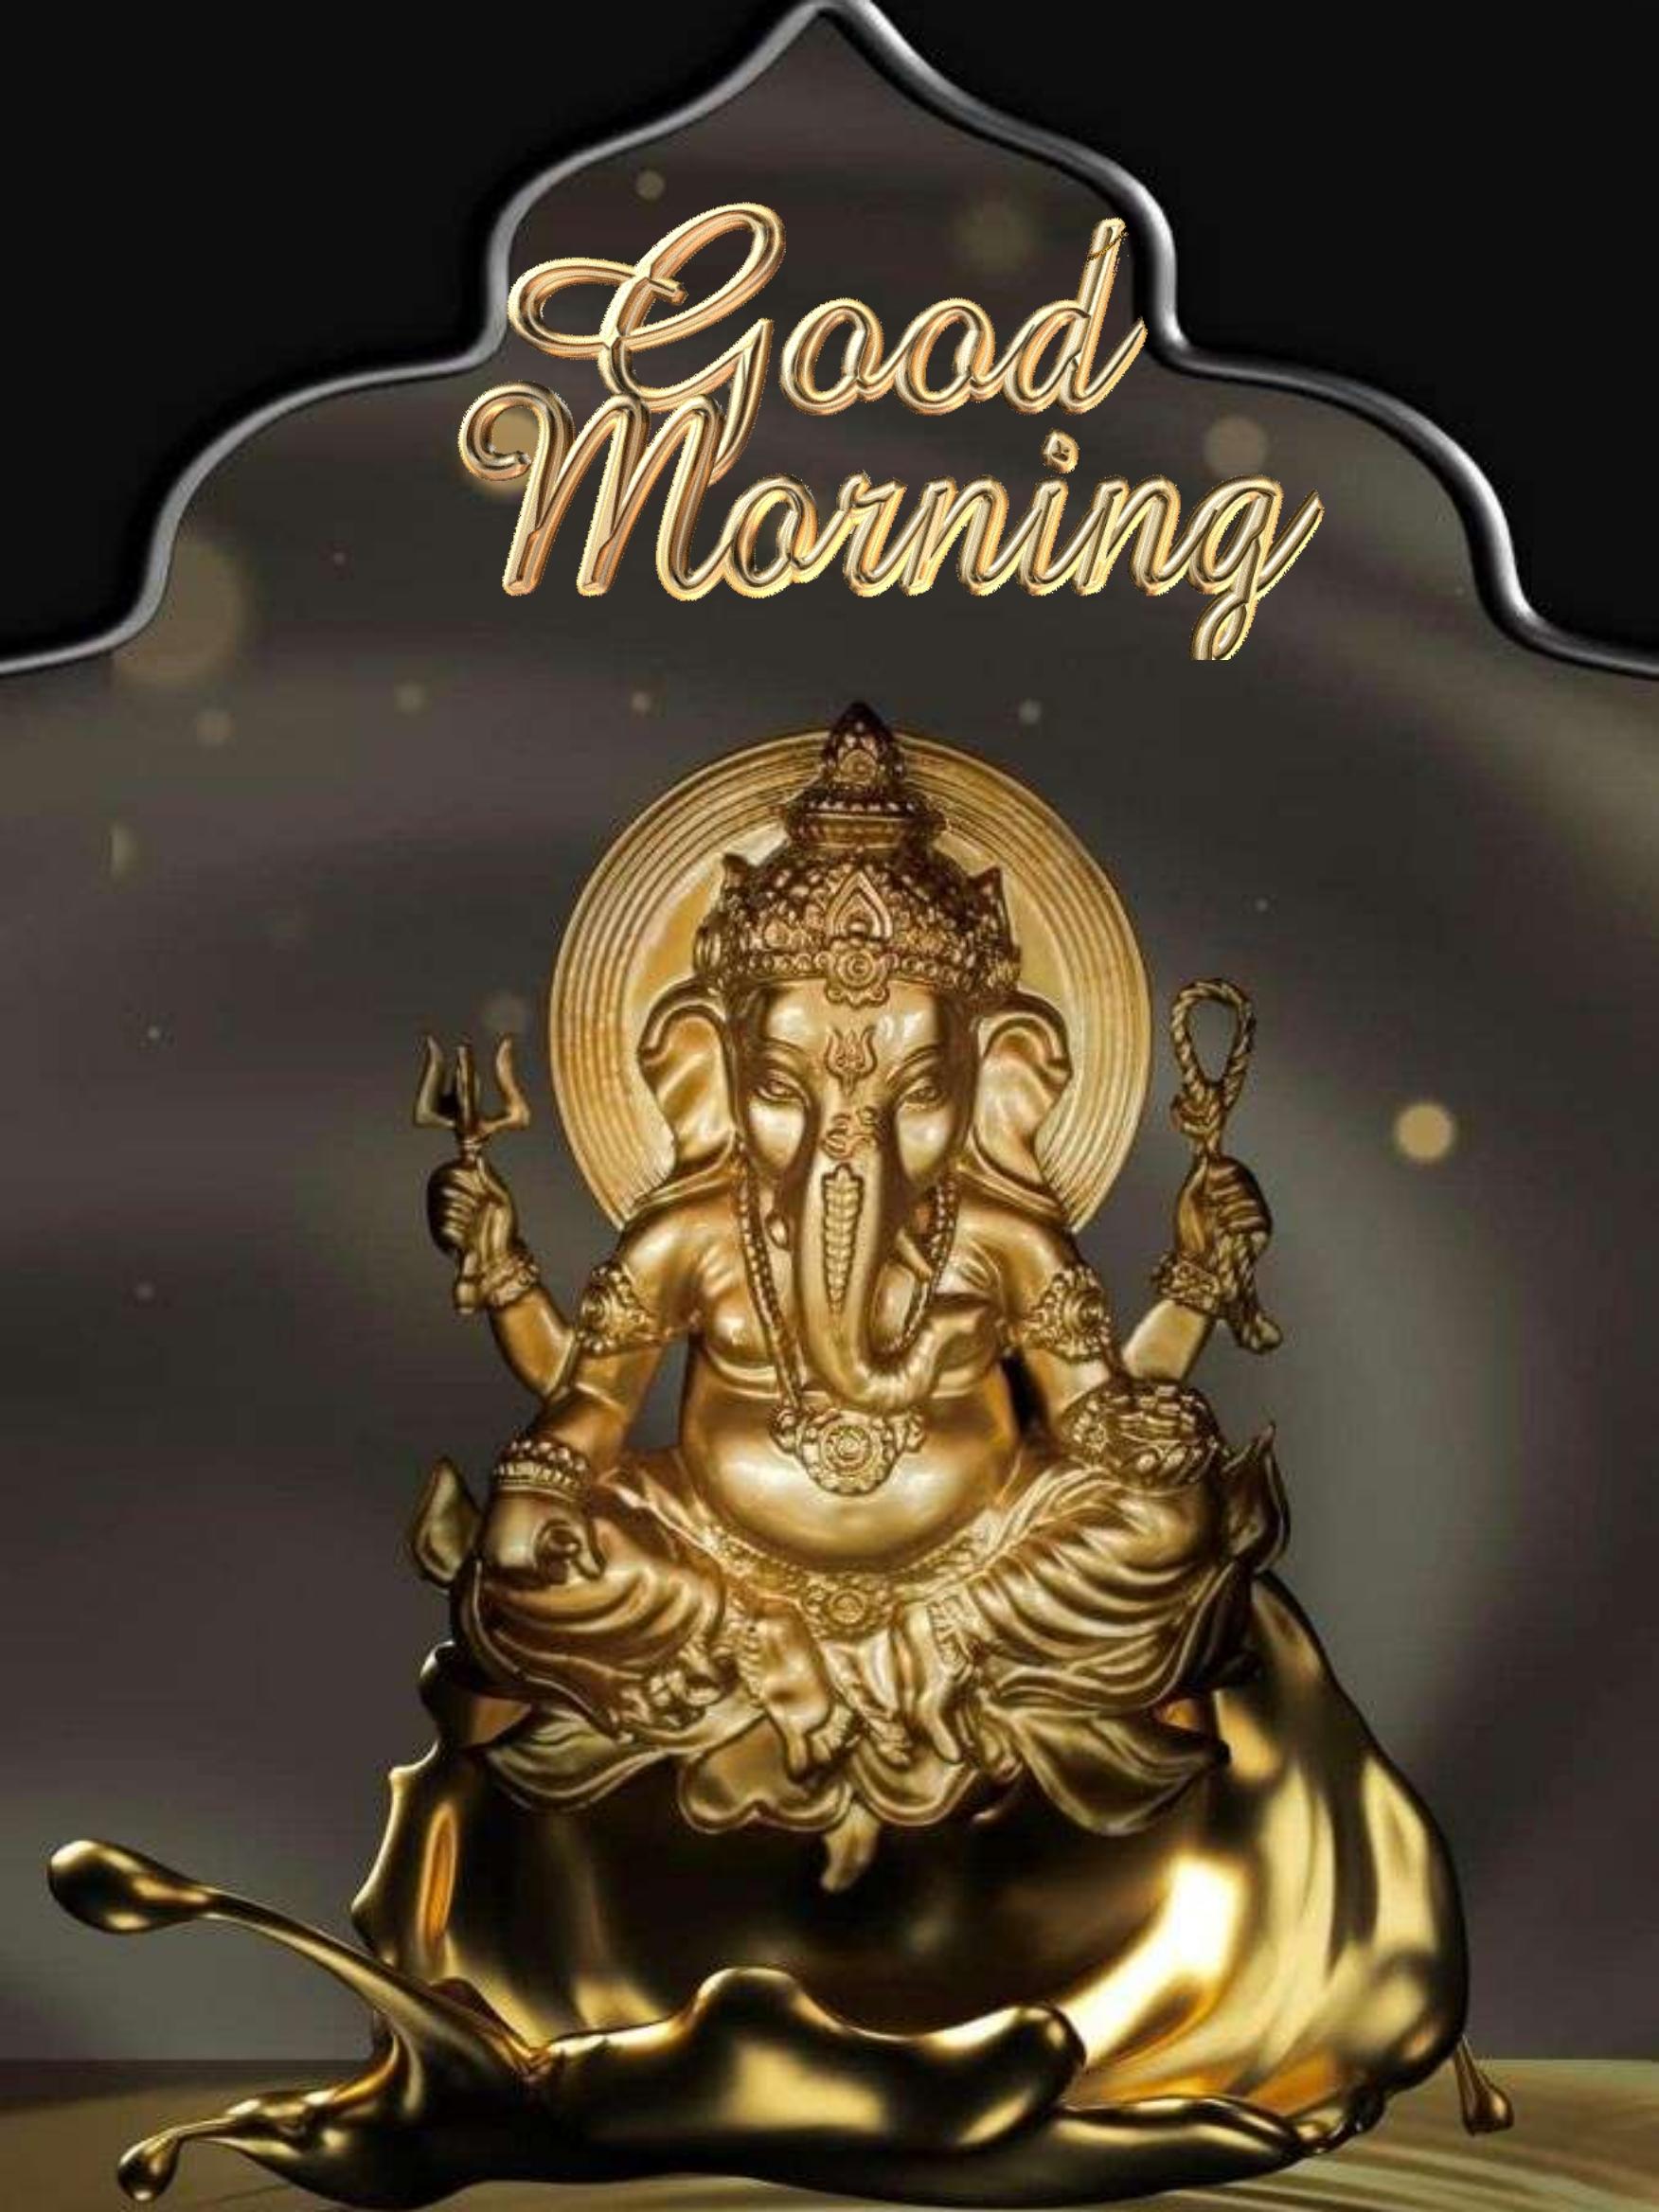 Good Morning Images With Ganesh